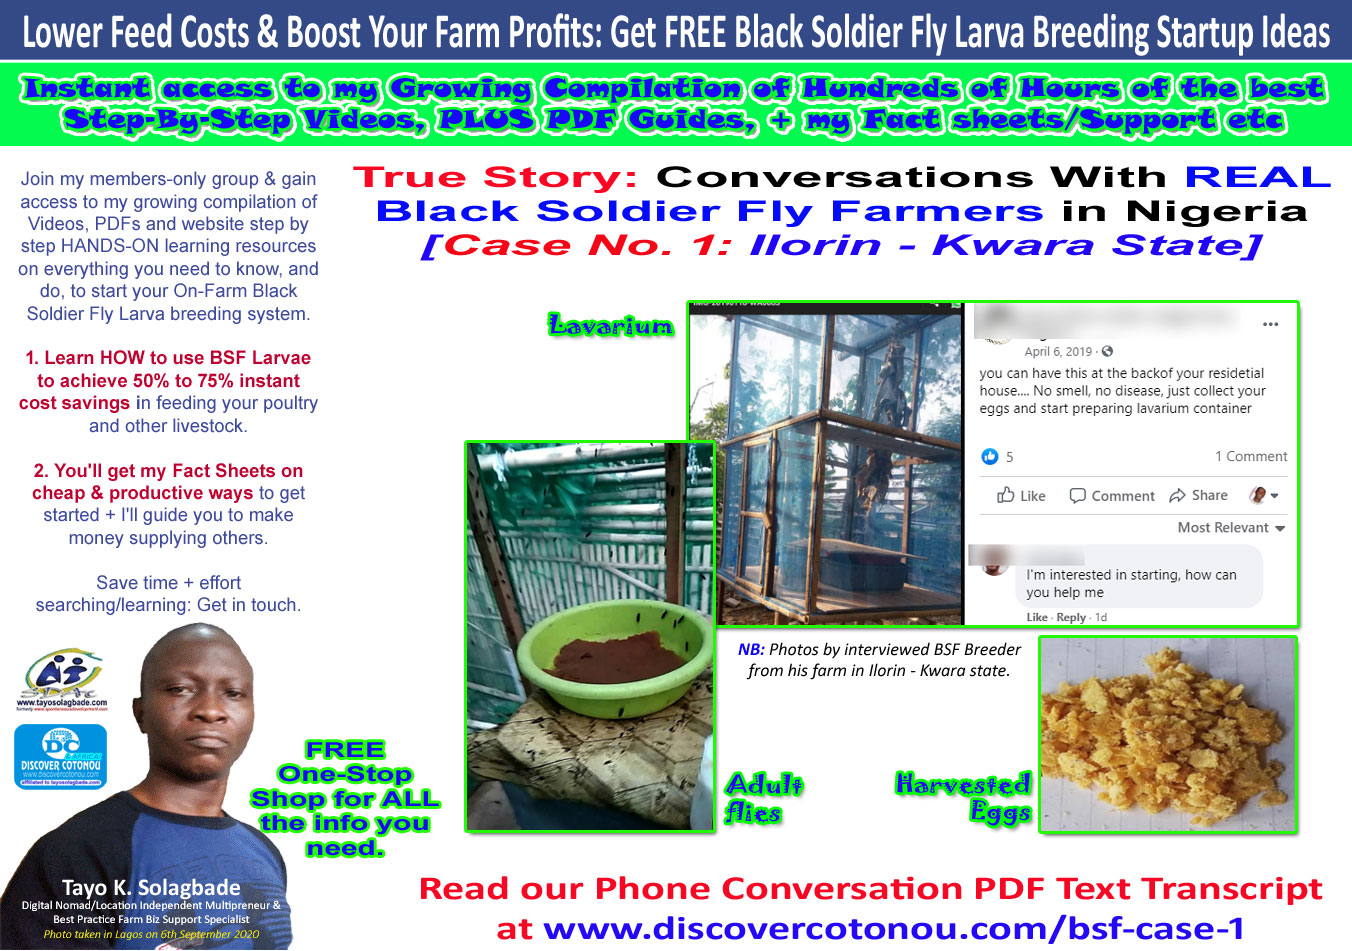 Click to download NOW - True Story: Conversations With REAL Black Soldier Fly Farmers in Nigeria [Case No. 1: Ilorin - Kwara State] - Download PDF Audio to Text Transcript